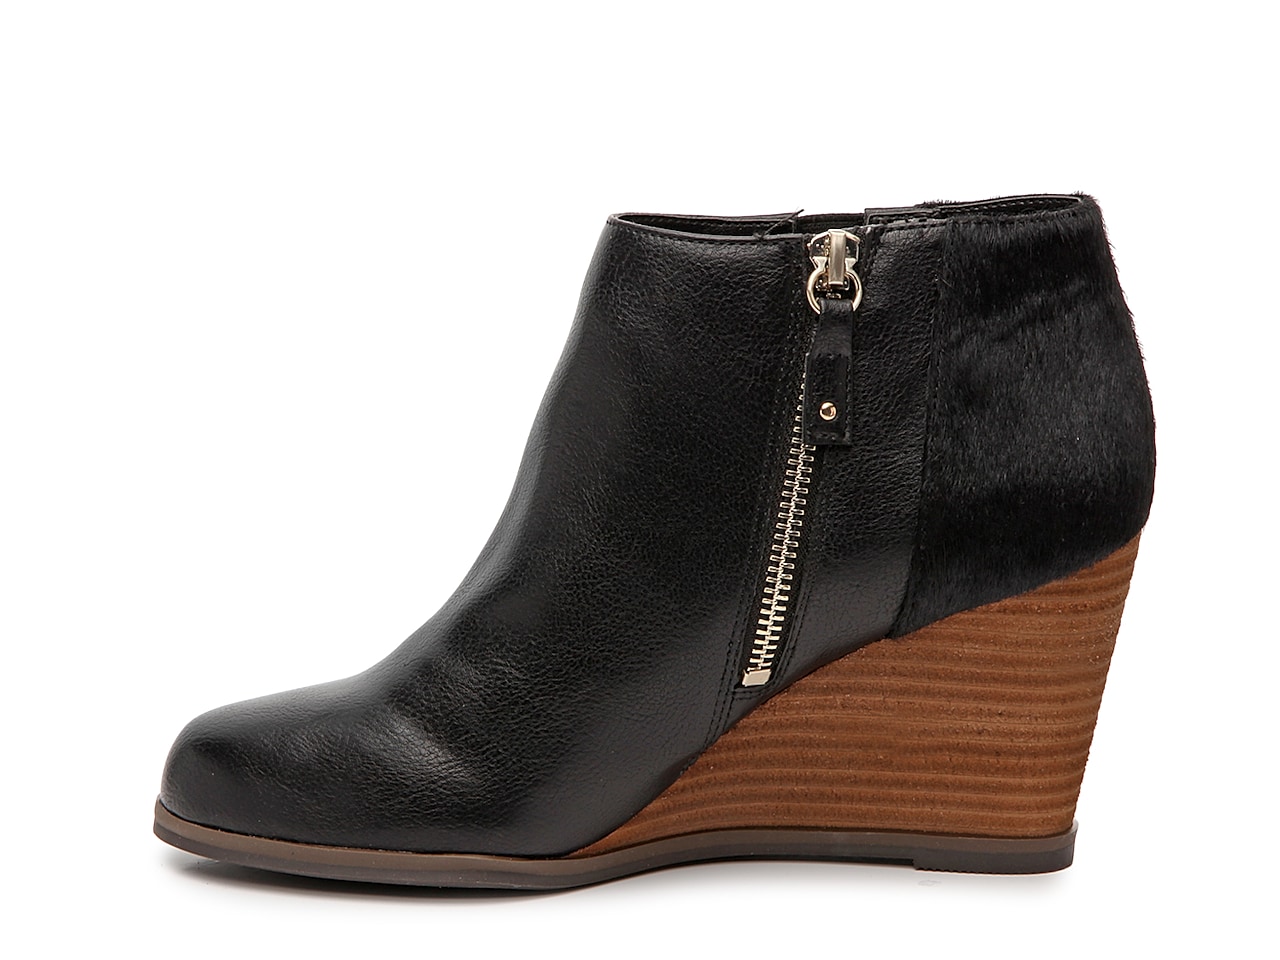 Dr. Scholl's Patch Wedge Bootie | DSW